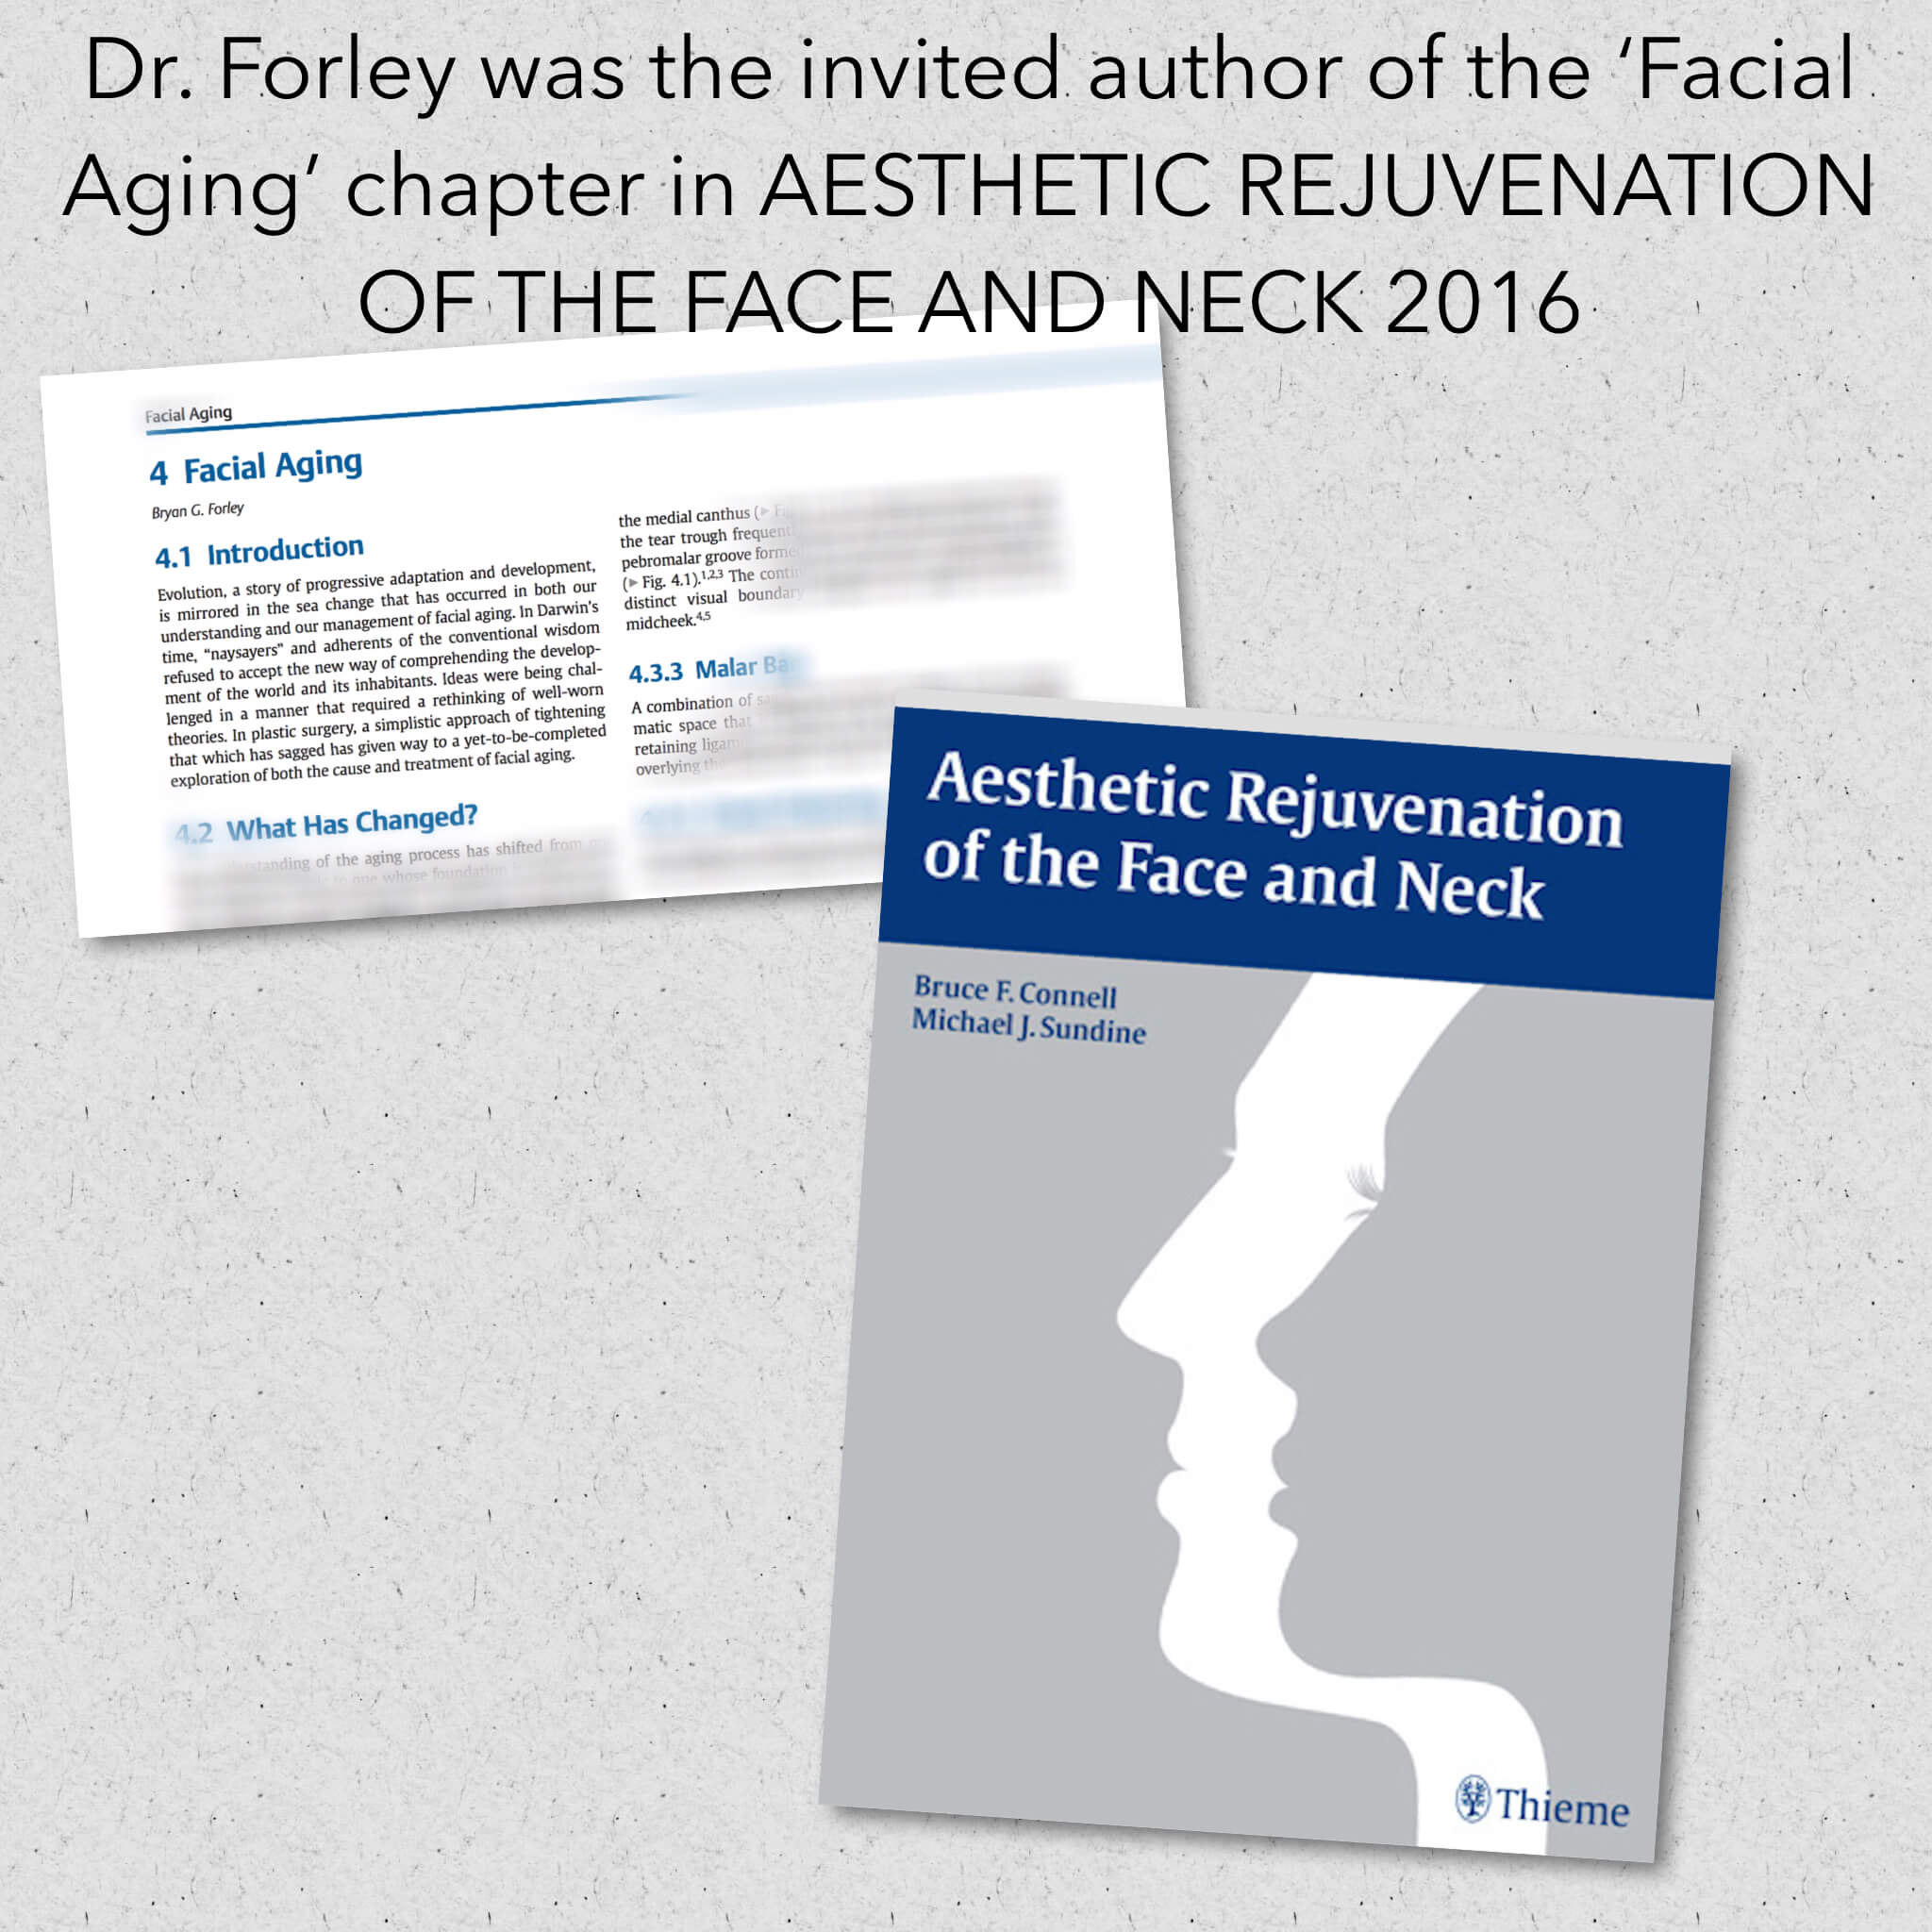 Dr. Forley was the invited author of the 'Facial Aging' chapter in Aesthetic Rejuvenation of the face and neck 2016